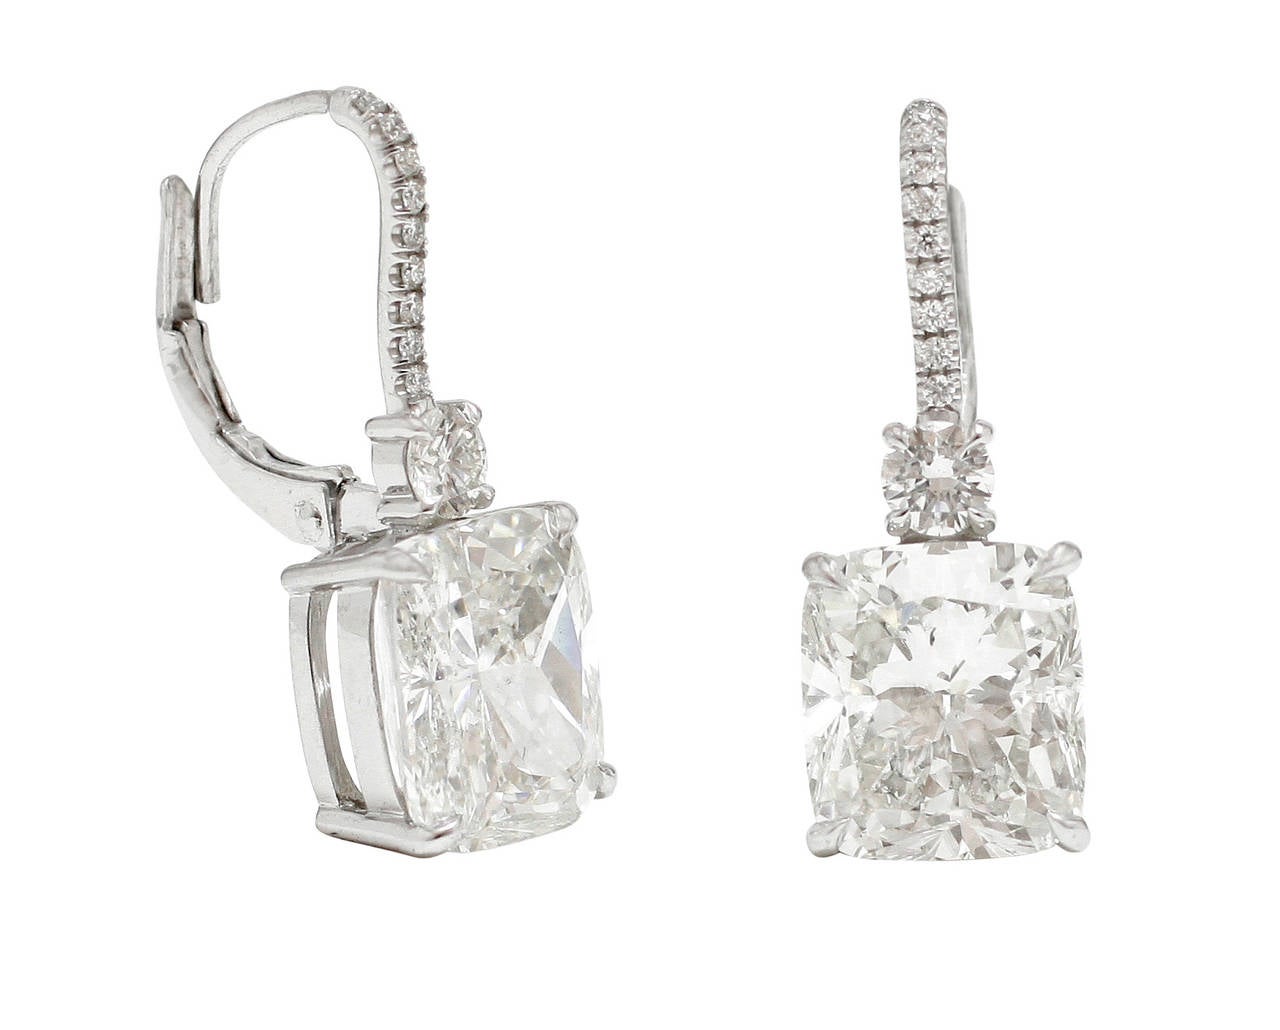 These phenomenal Burdeen's Custom Diamond Hanging Earrings take PERFECTION to a whole new meaning !!! These unbelievable Earrings have the most breathtaking Cushion-Cut Diamonds hanging down from a round 4 prong diamond & diamond french wire. The